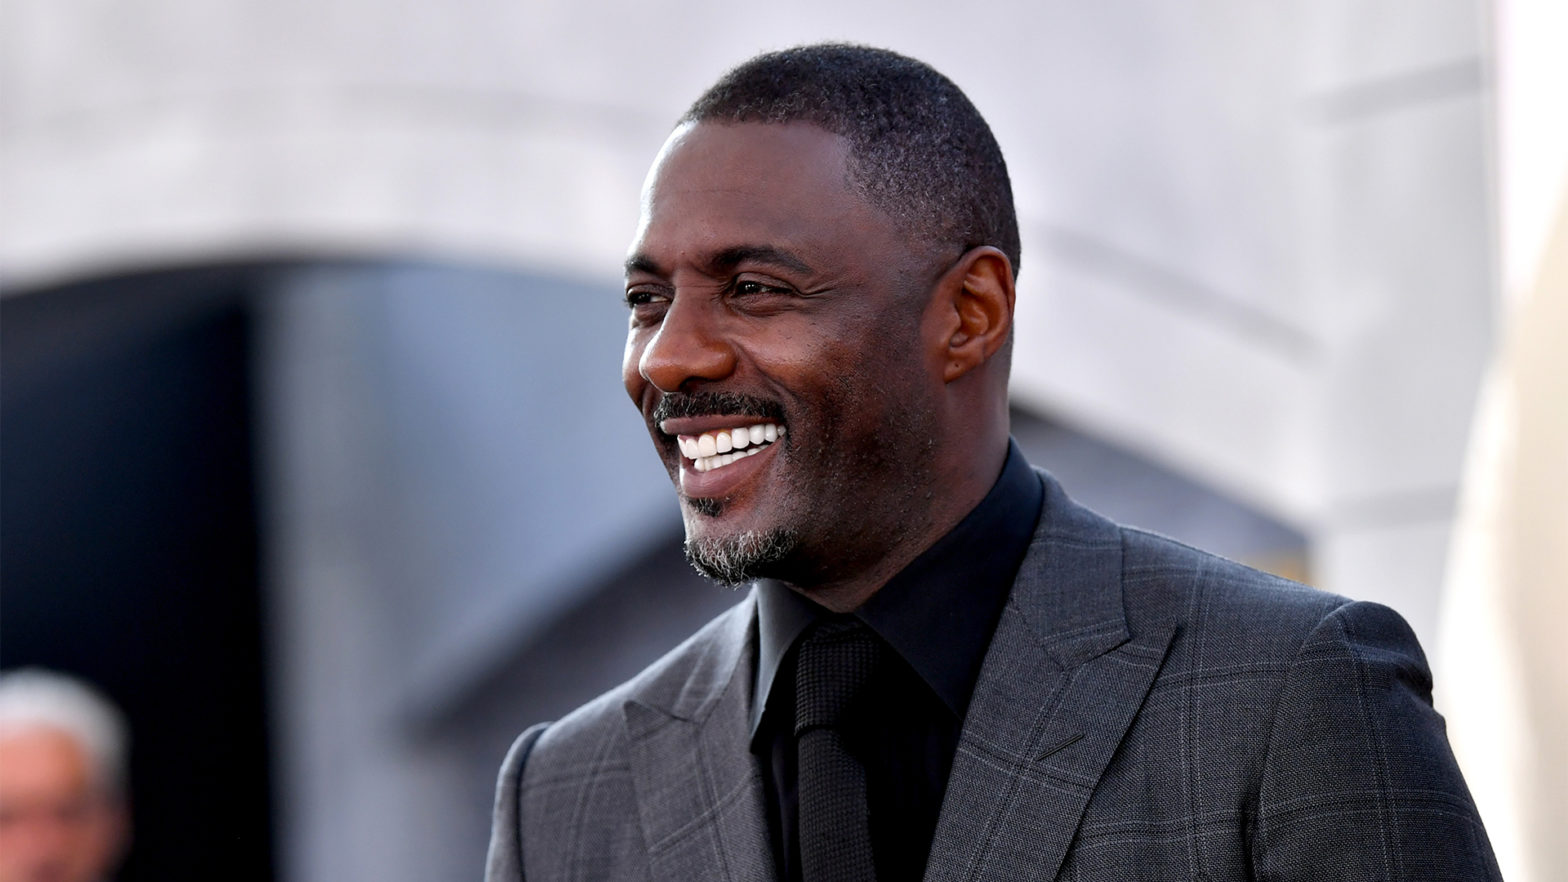 How Much Is Idris Elba, One Of The Most Influential People In The World, Worth Today?